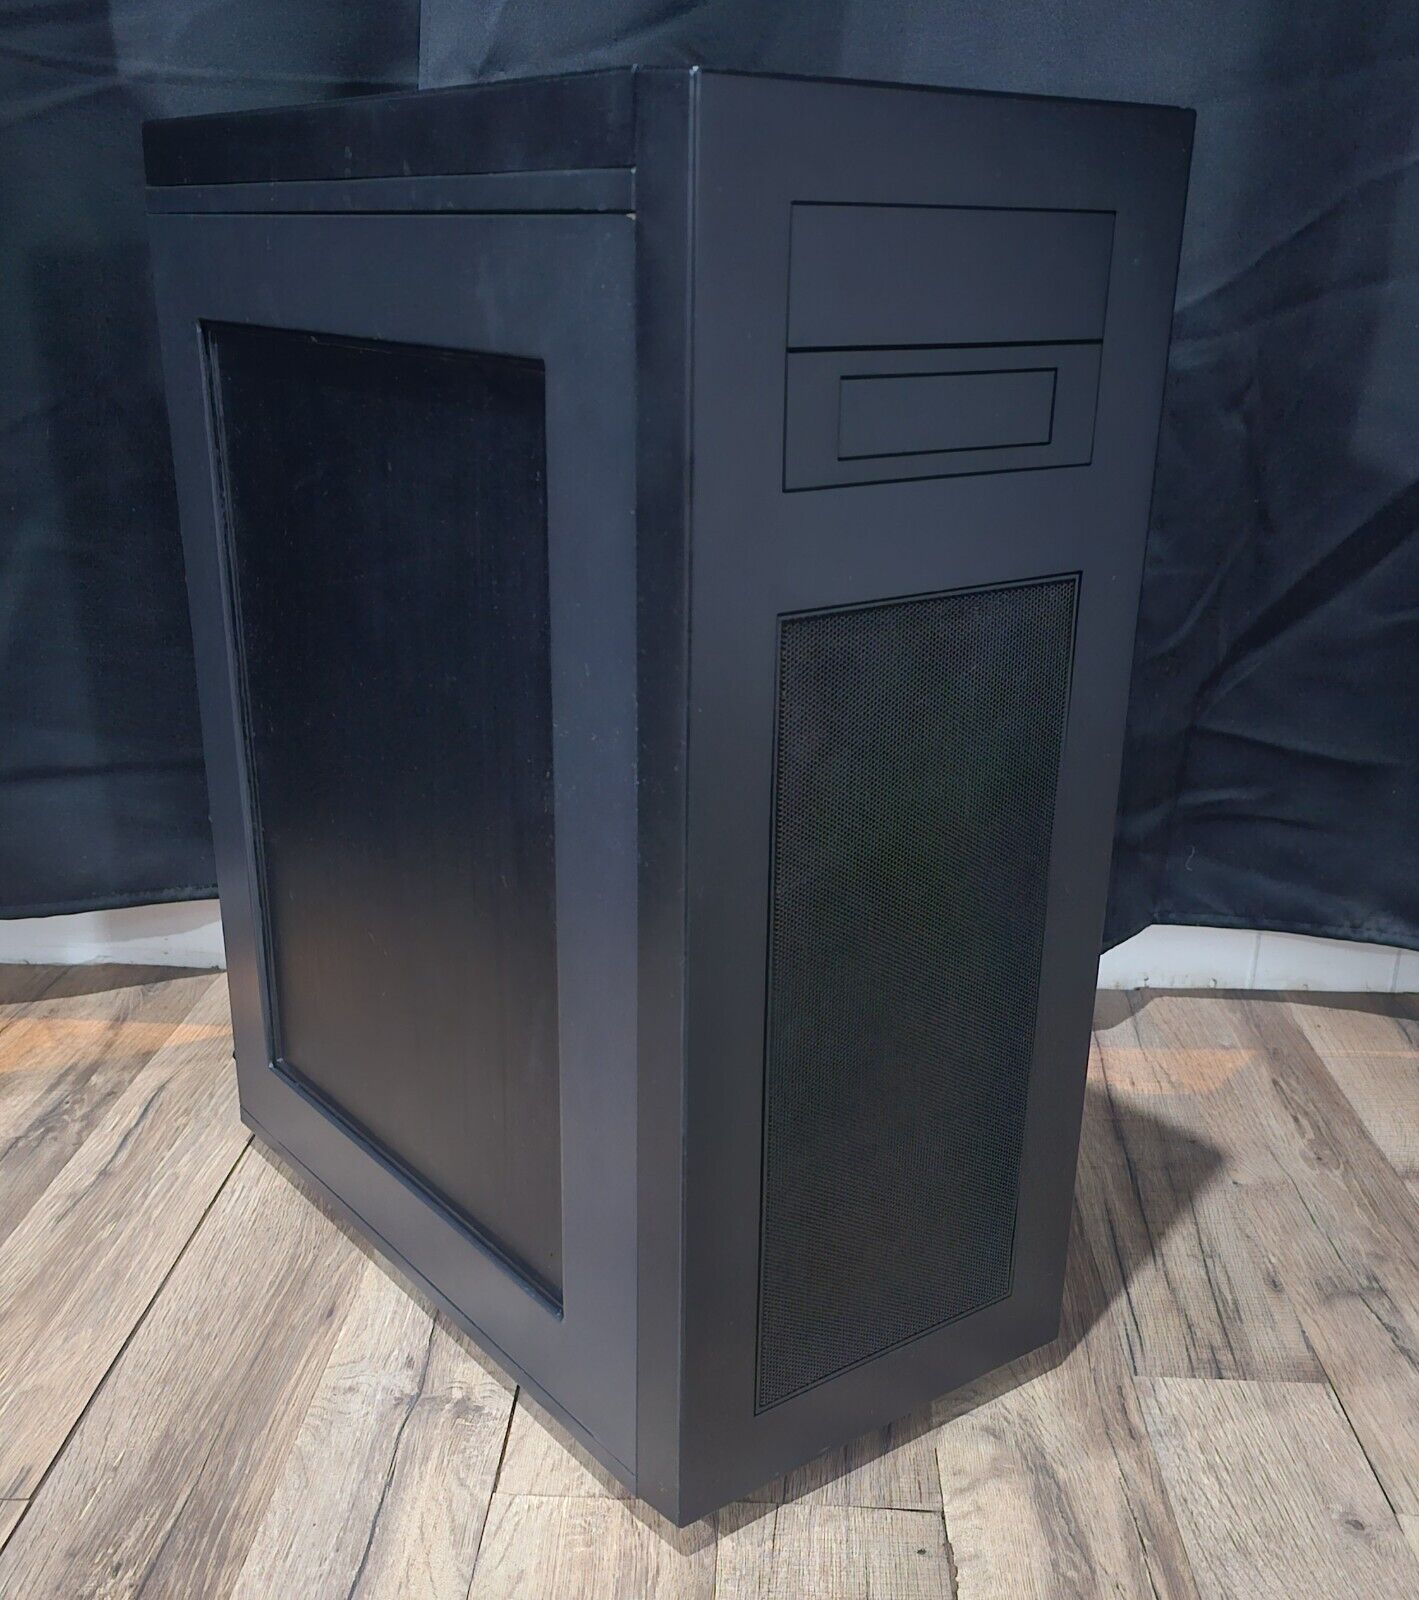 Rosewill RISE ATX Full Tower Gaming PC Computer Case CUSTOM BLACK